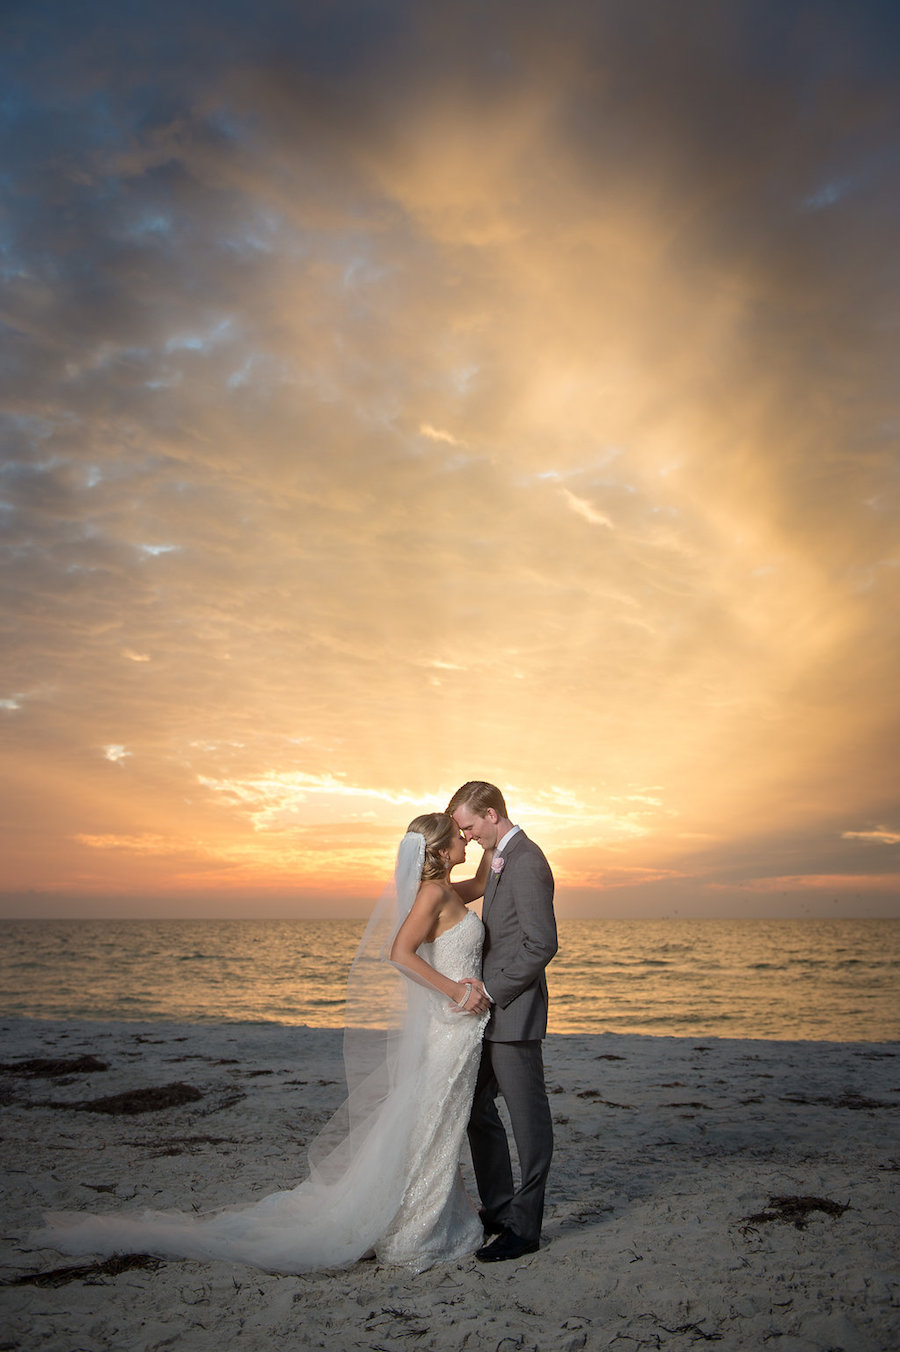 Bride and Groom Clearwater Beach Sunset Wedding Portrait in the Sand | Clearwater Beach Wedding Planner Parties a la Carte | Photographer Marc Edwards Photographs